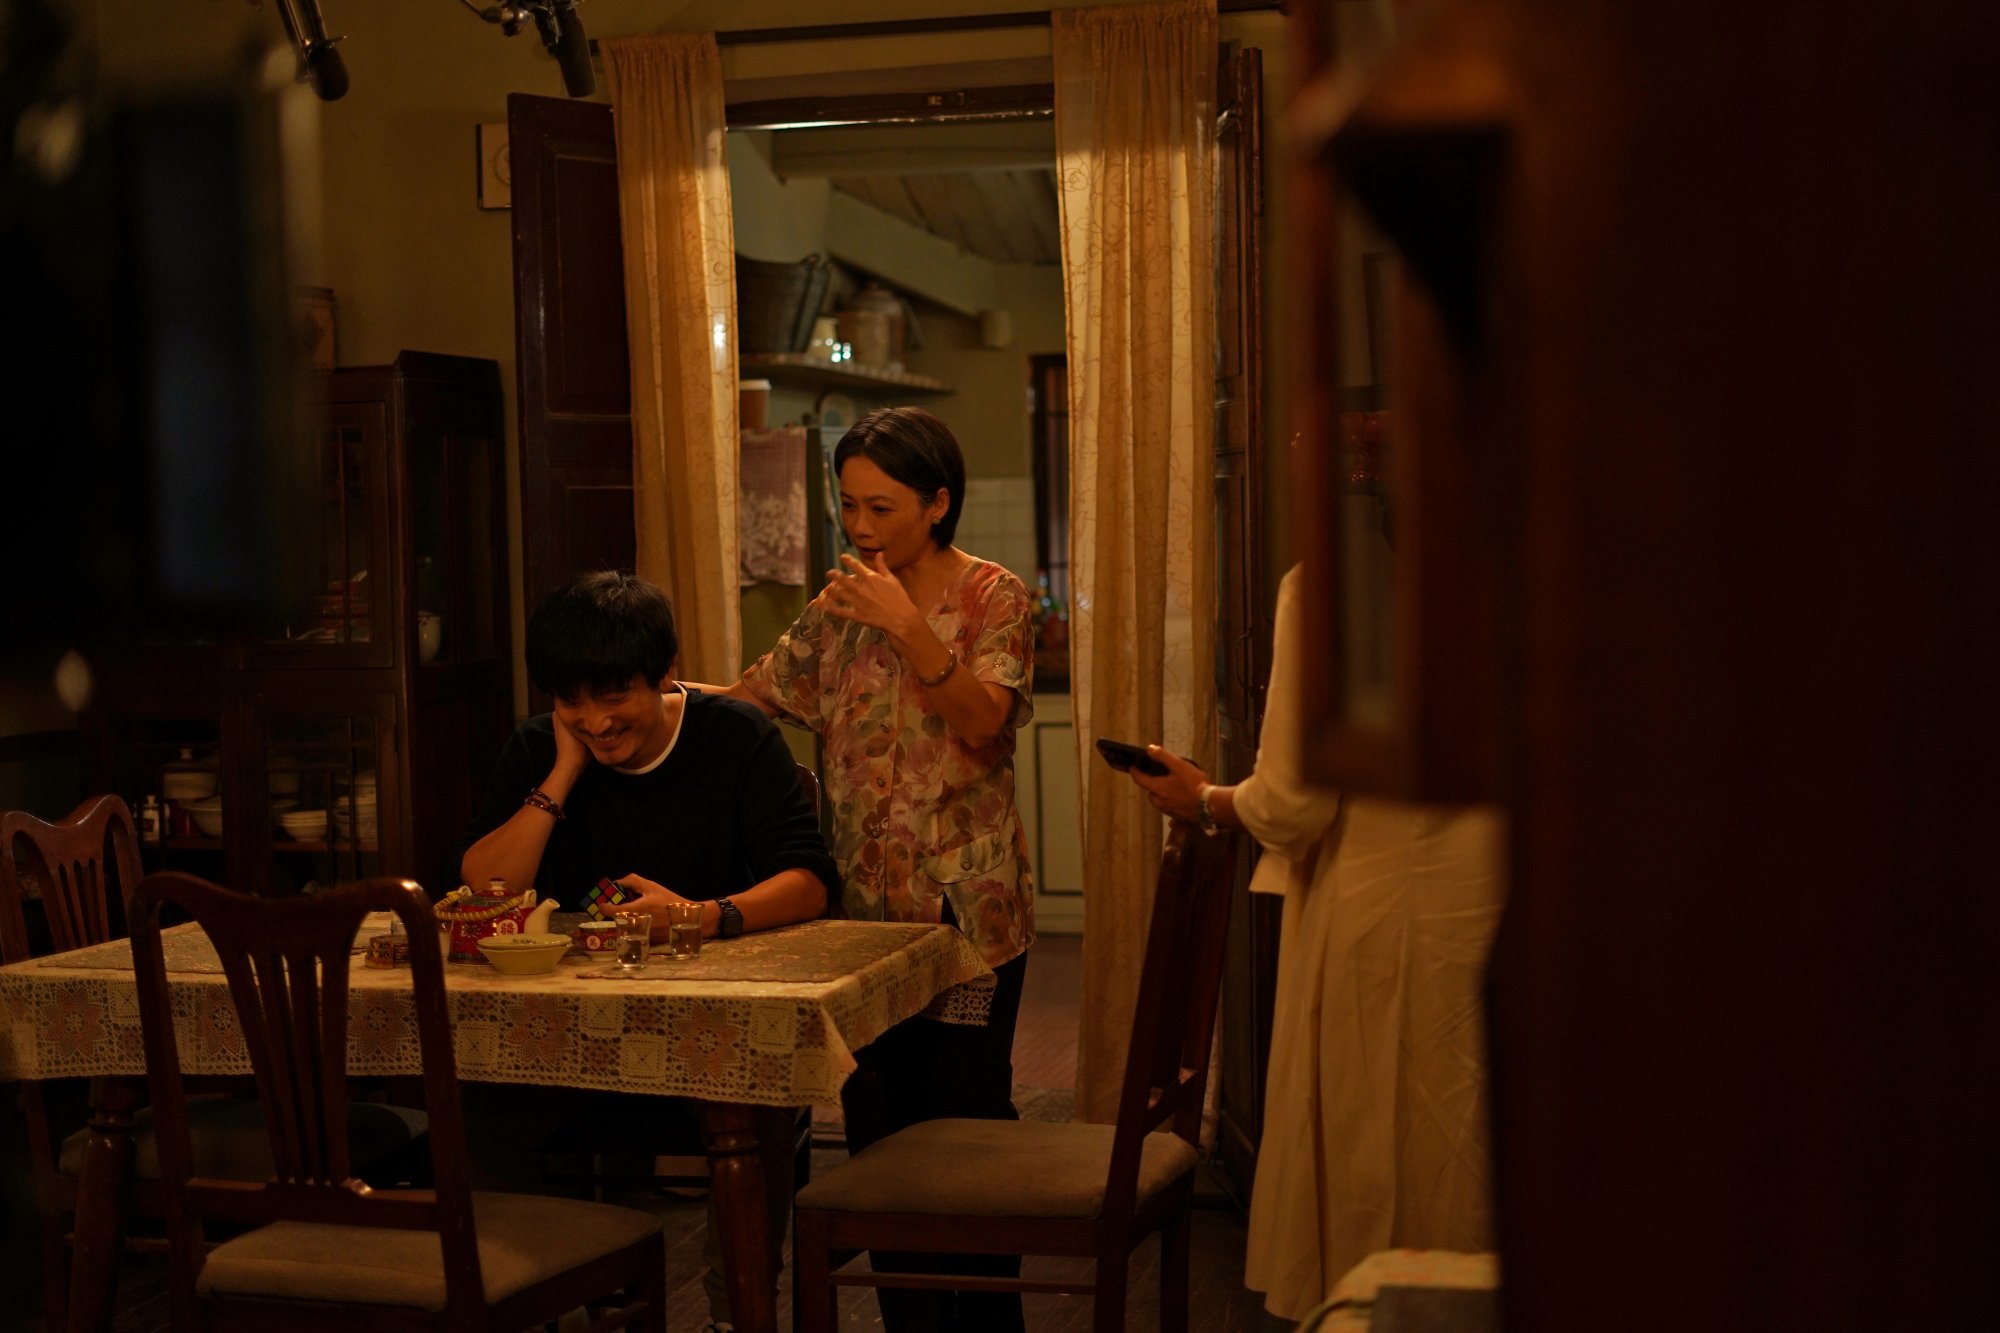 A still of Yann Yann Yeo and Meiyang Chang in "Modern Love Mumbai", sitting at the dining table of their apartment.